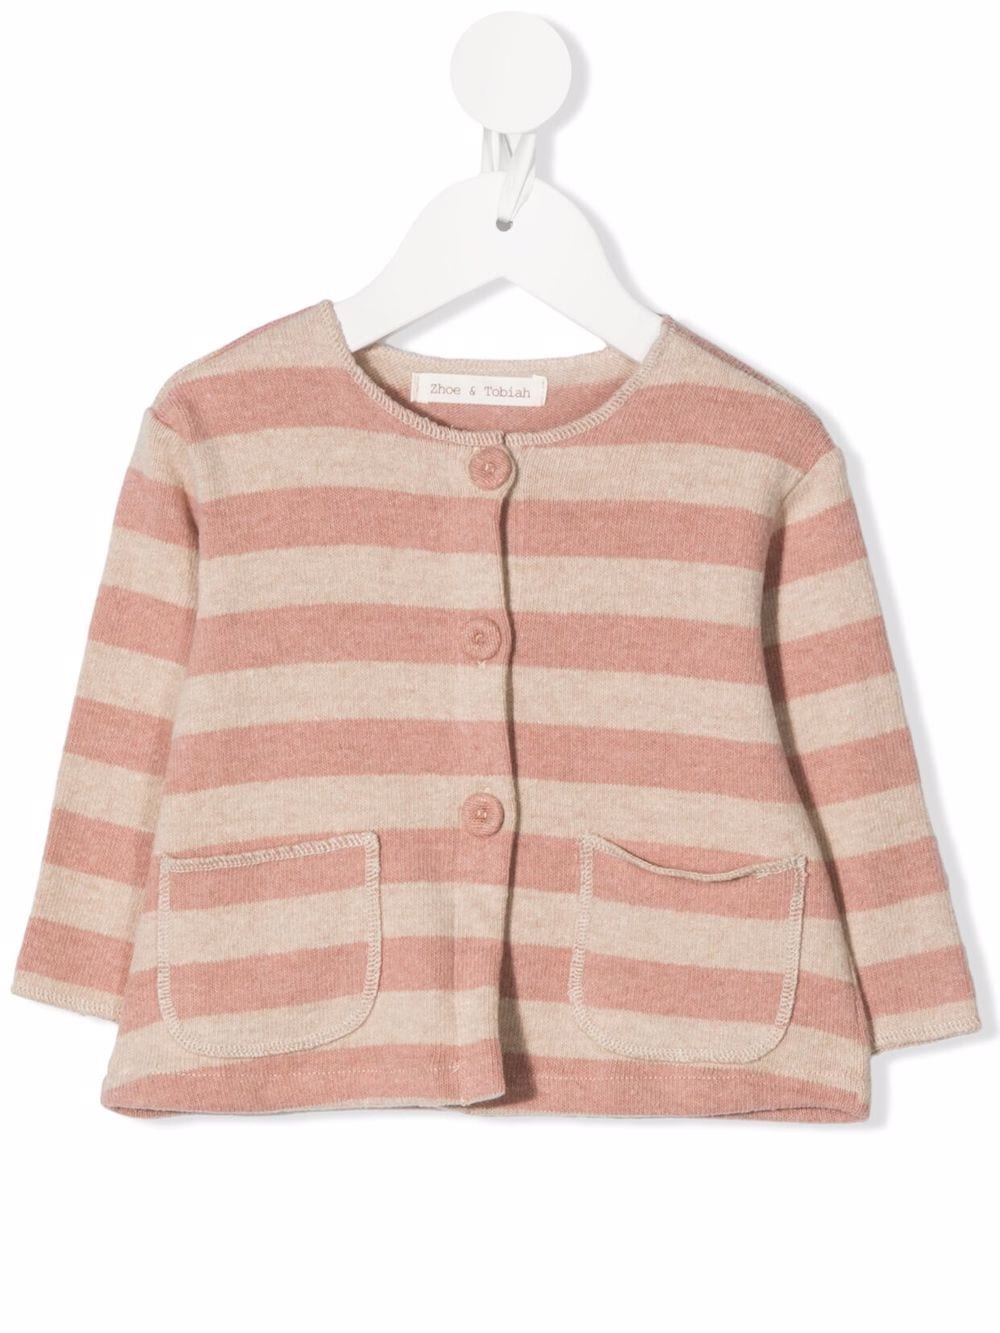 Zhoe & Tobiah Babies' Striped Button-front Cardigan In Pink